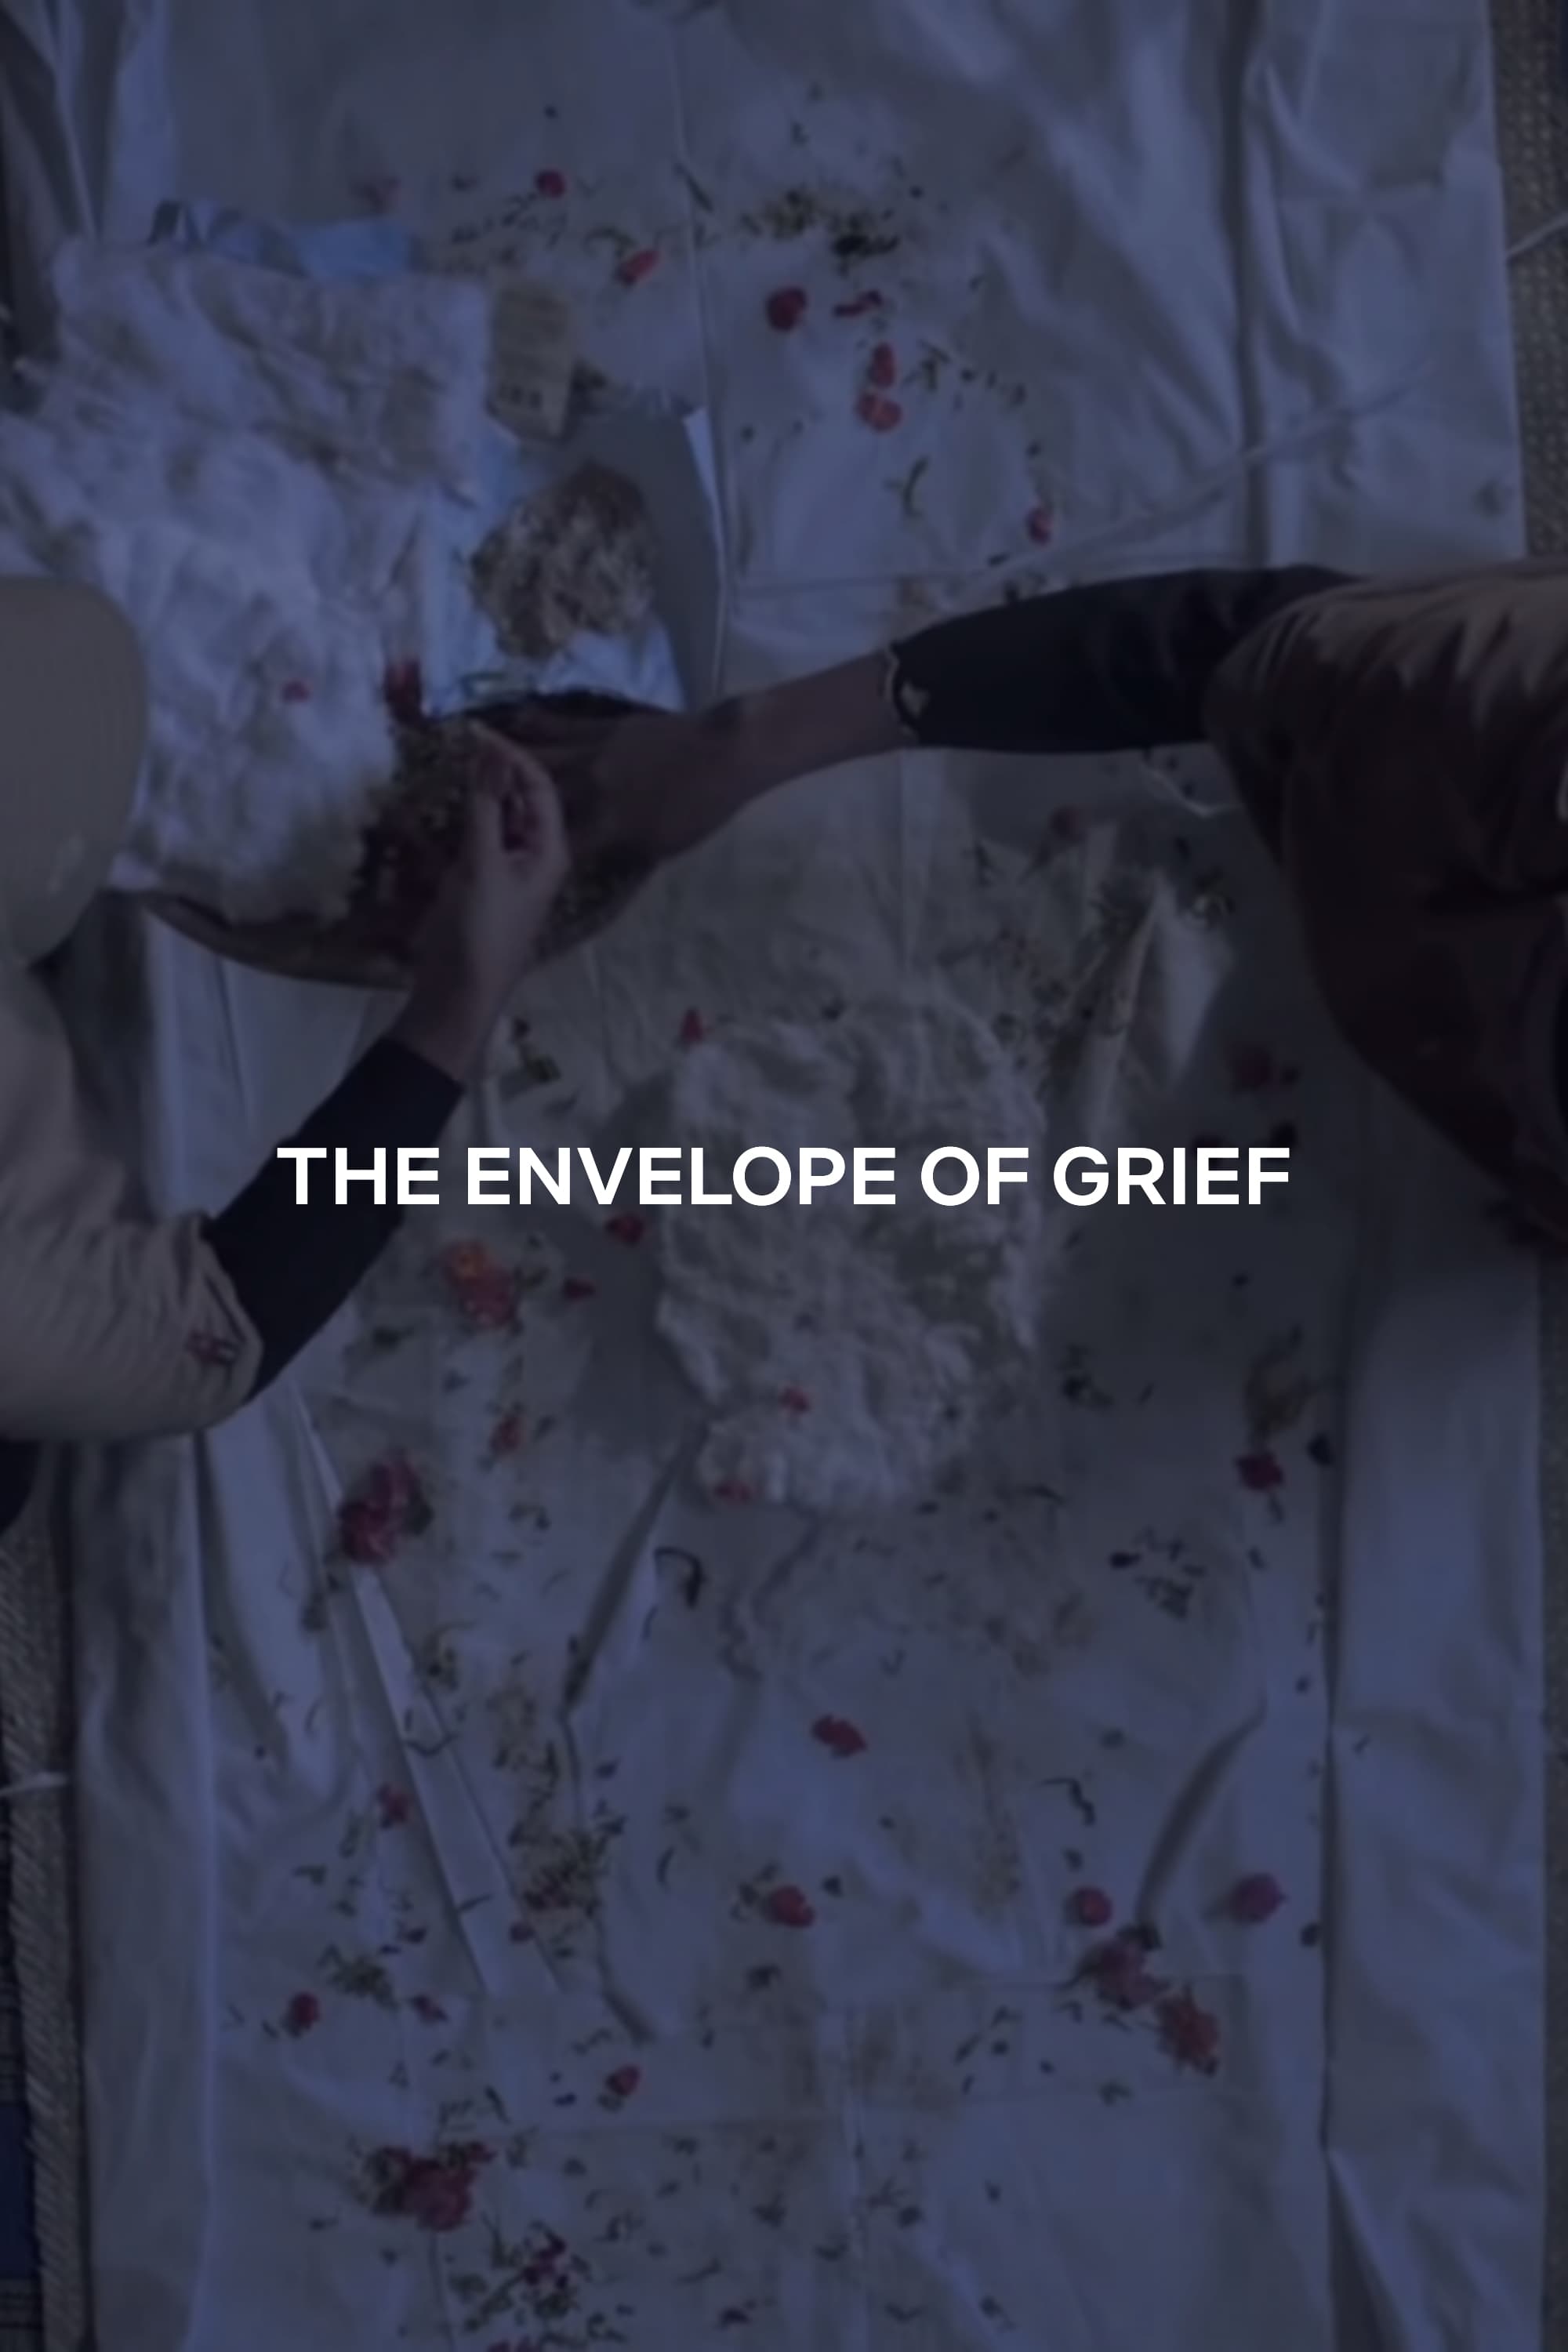 The Envelope of Grief